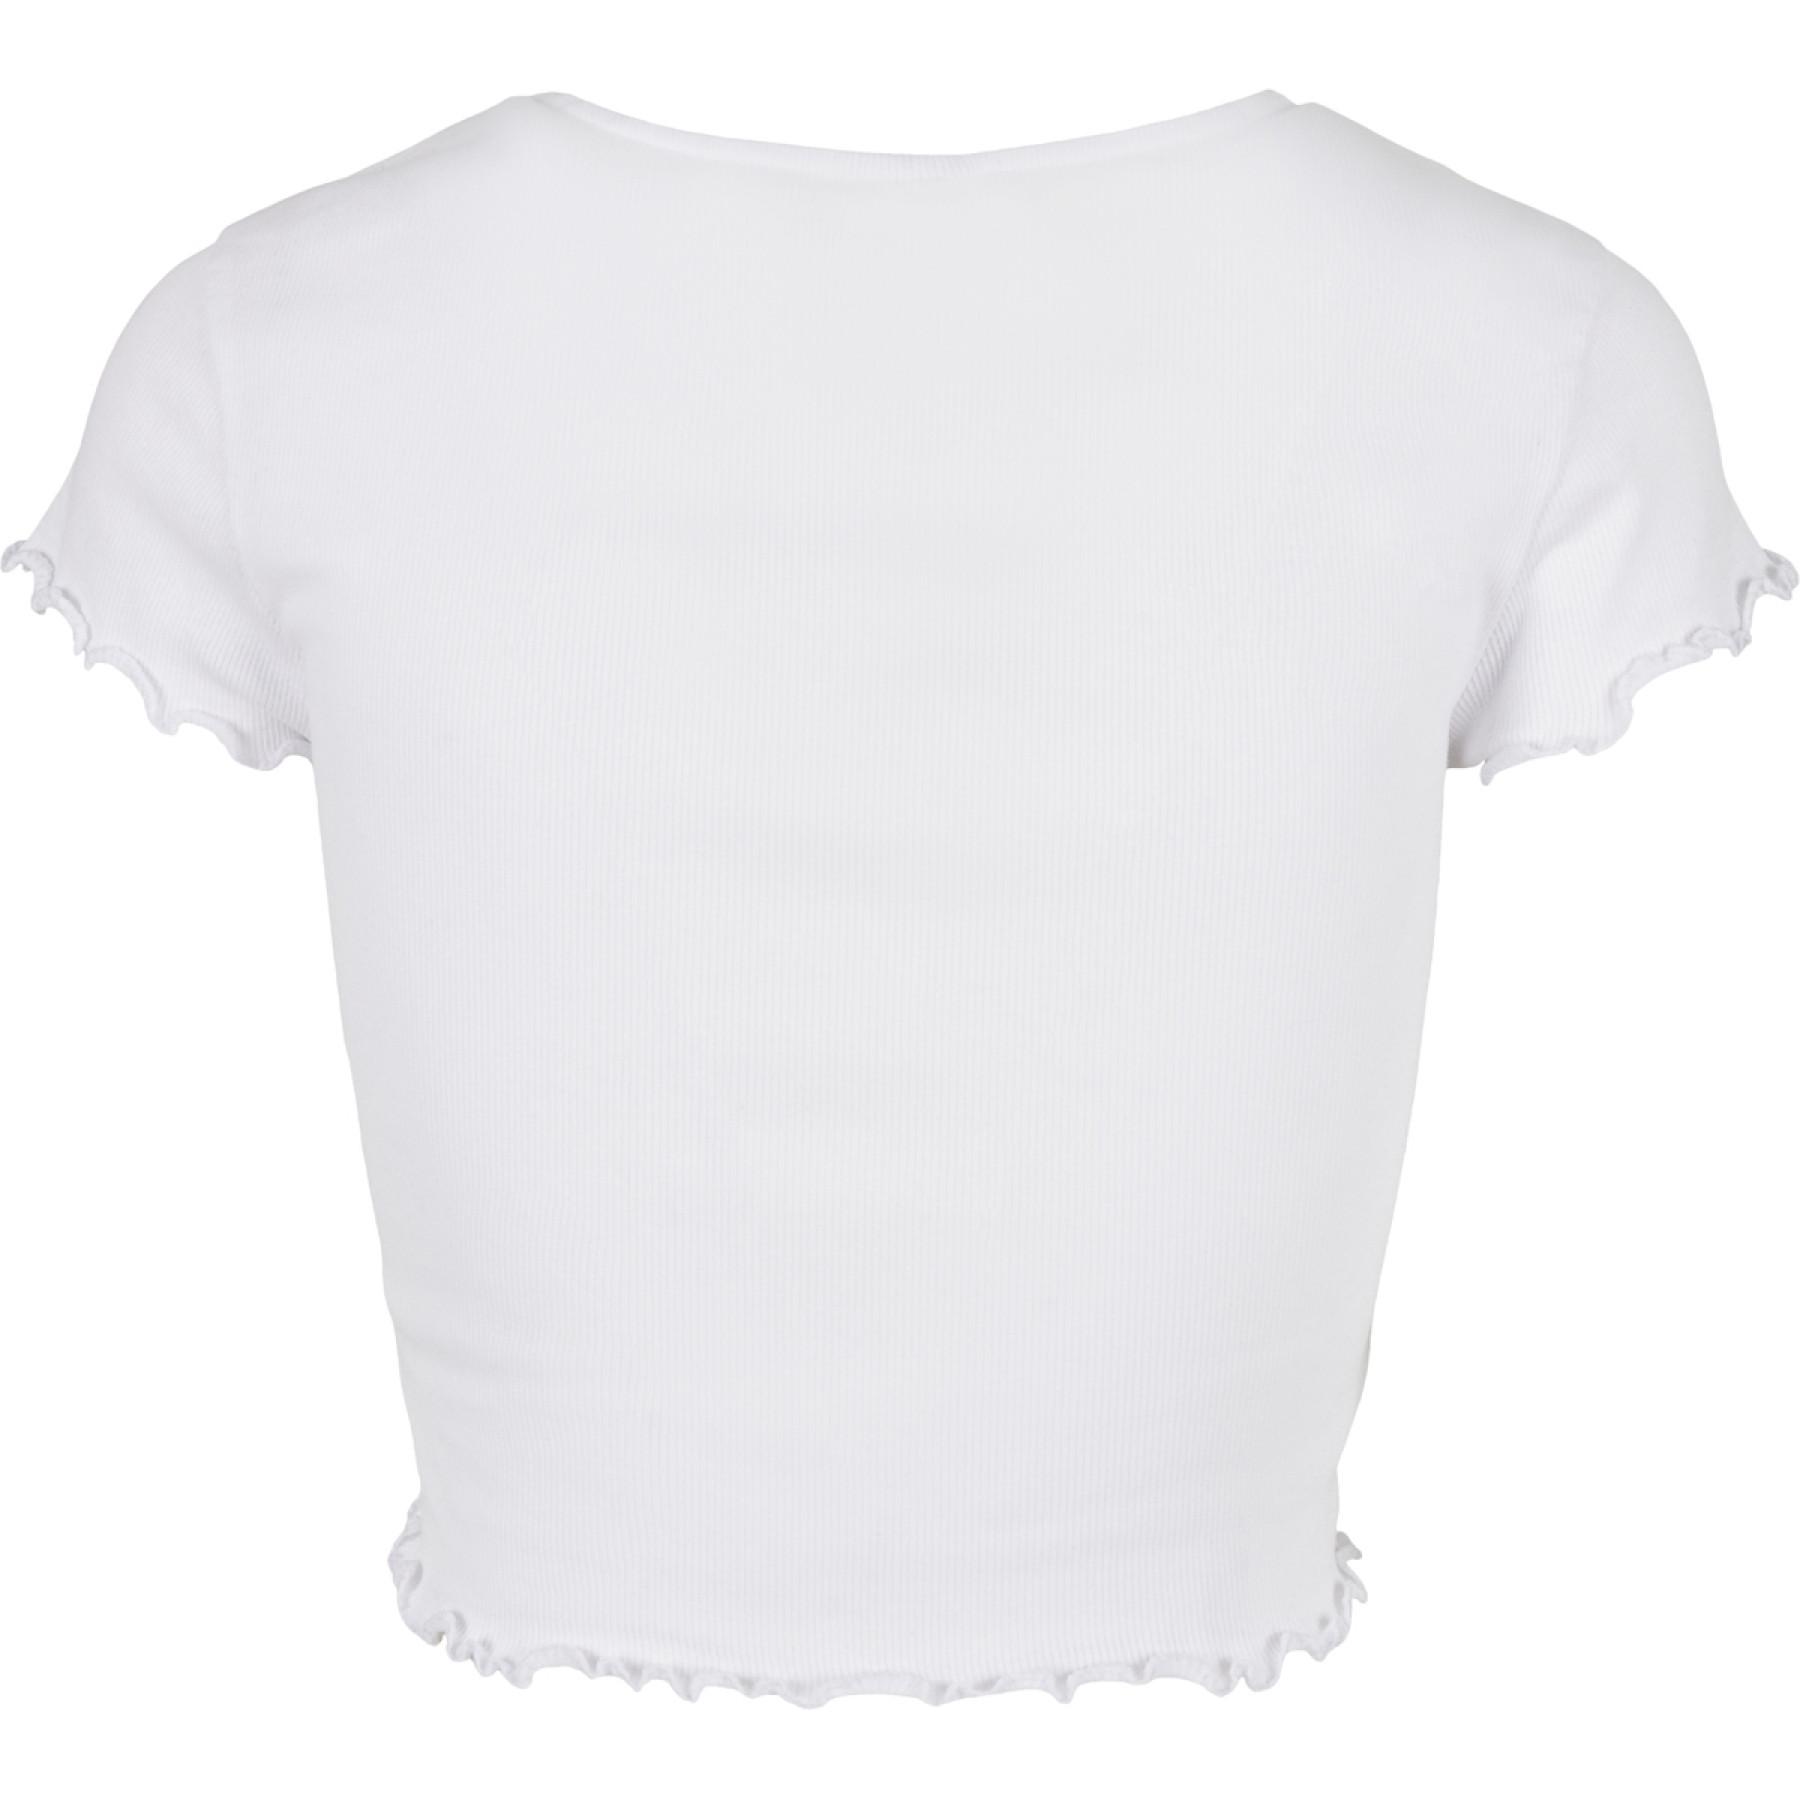 T-shirt femme Urban Classics cropped button up rib-grandes tailles